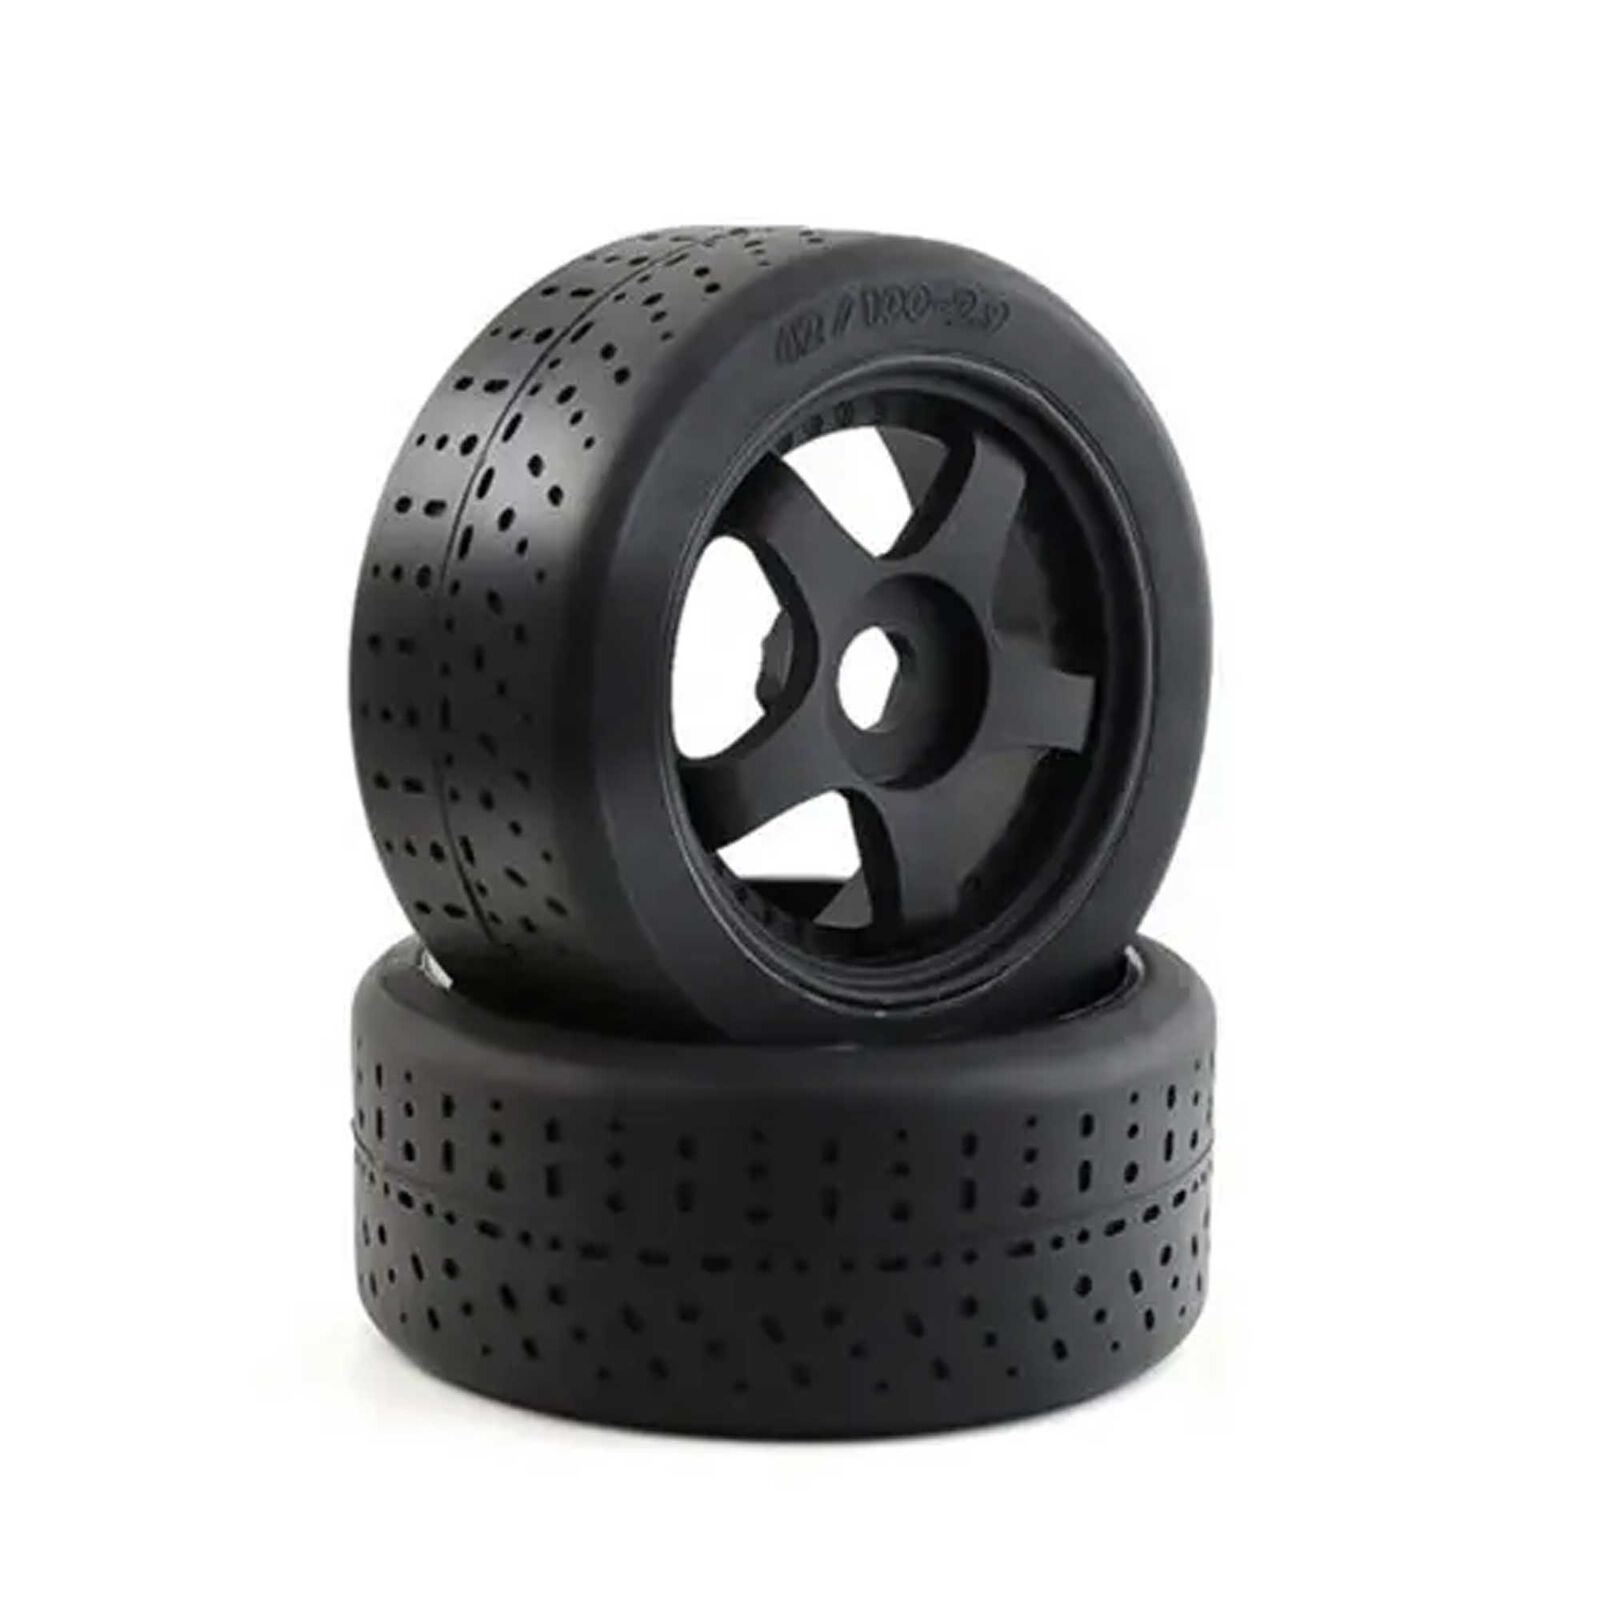 2.9 Pre-Mounted Tires (2) 17mm Hex 103mm O.D. for Arrma 1/7 Limitless, Felony & Infraction